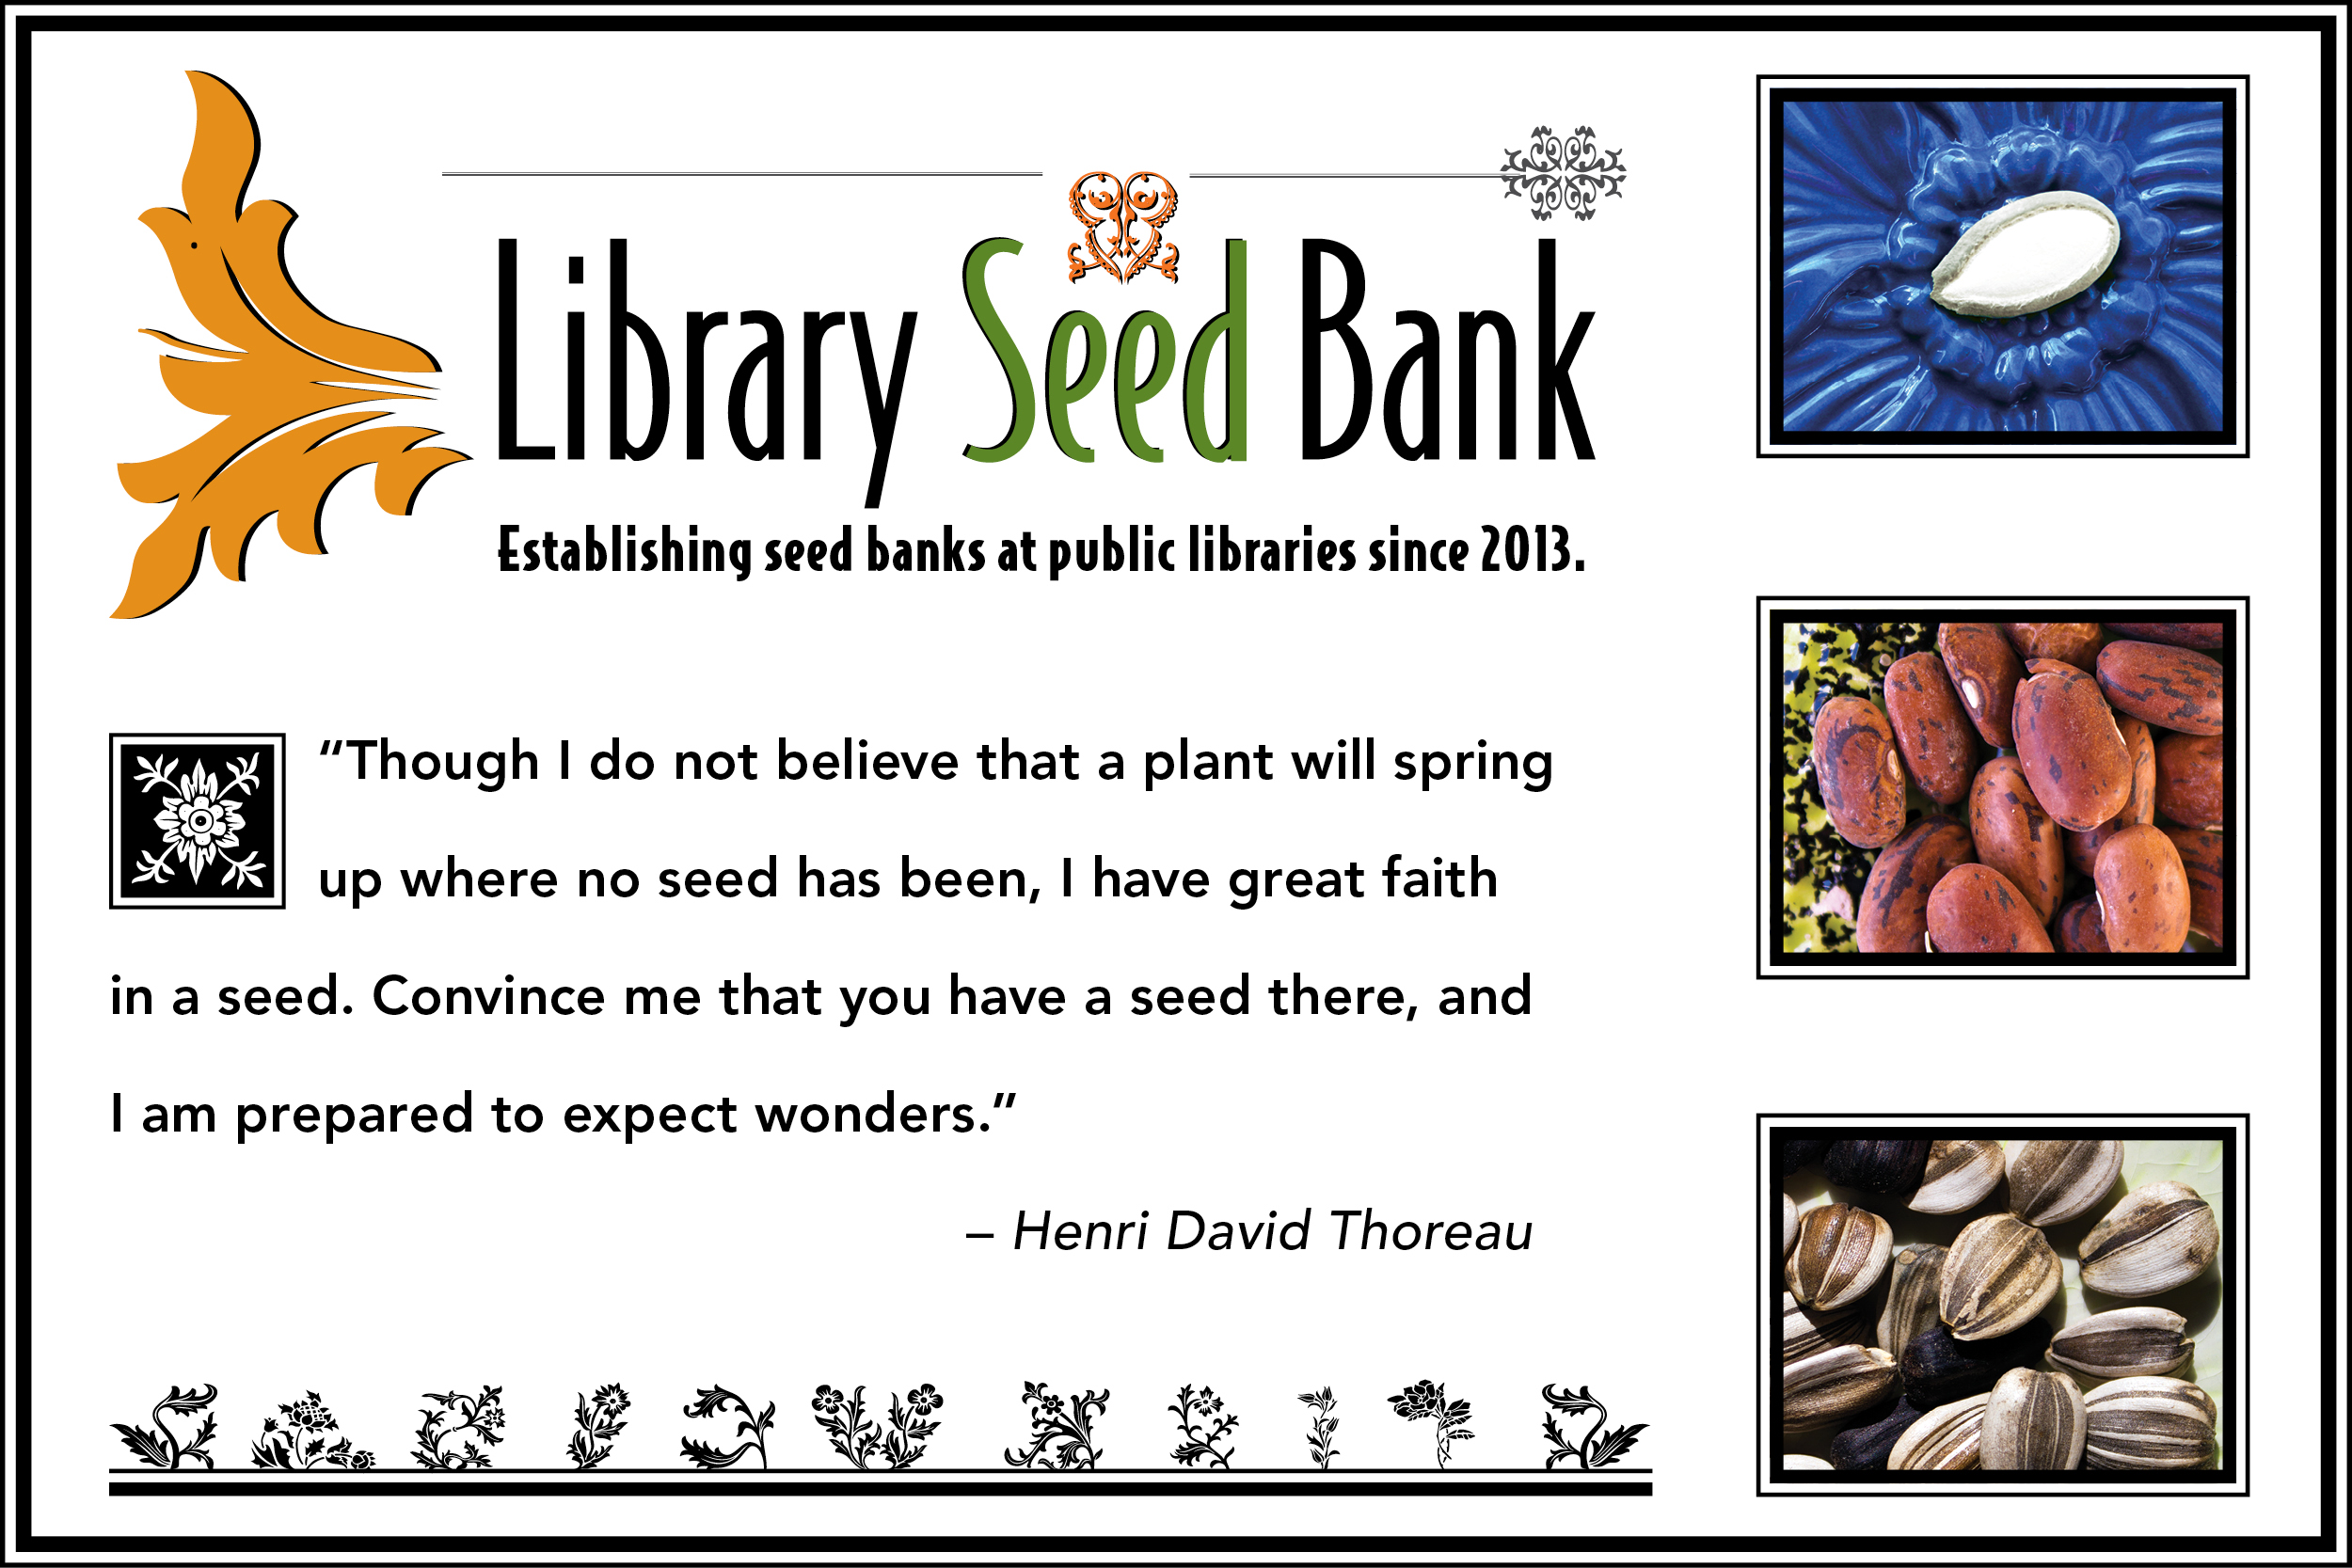 graphic for the Library Seed Bank project